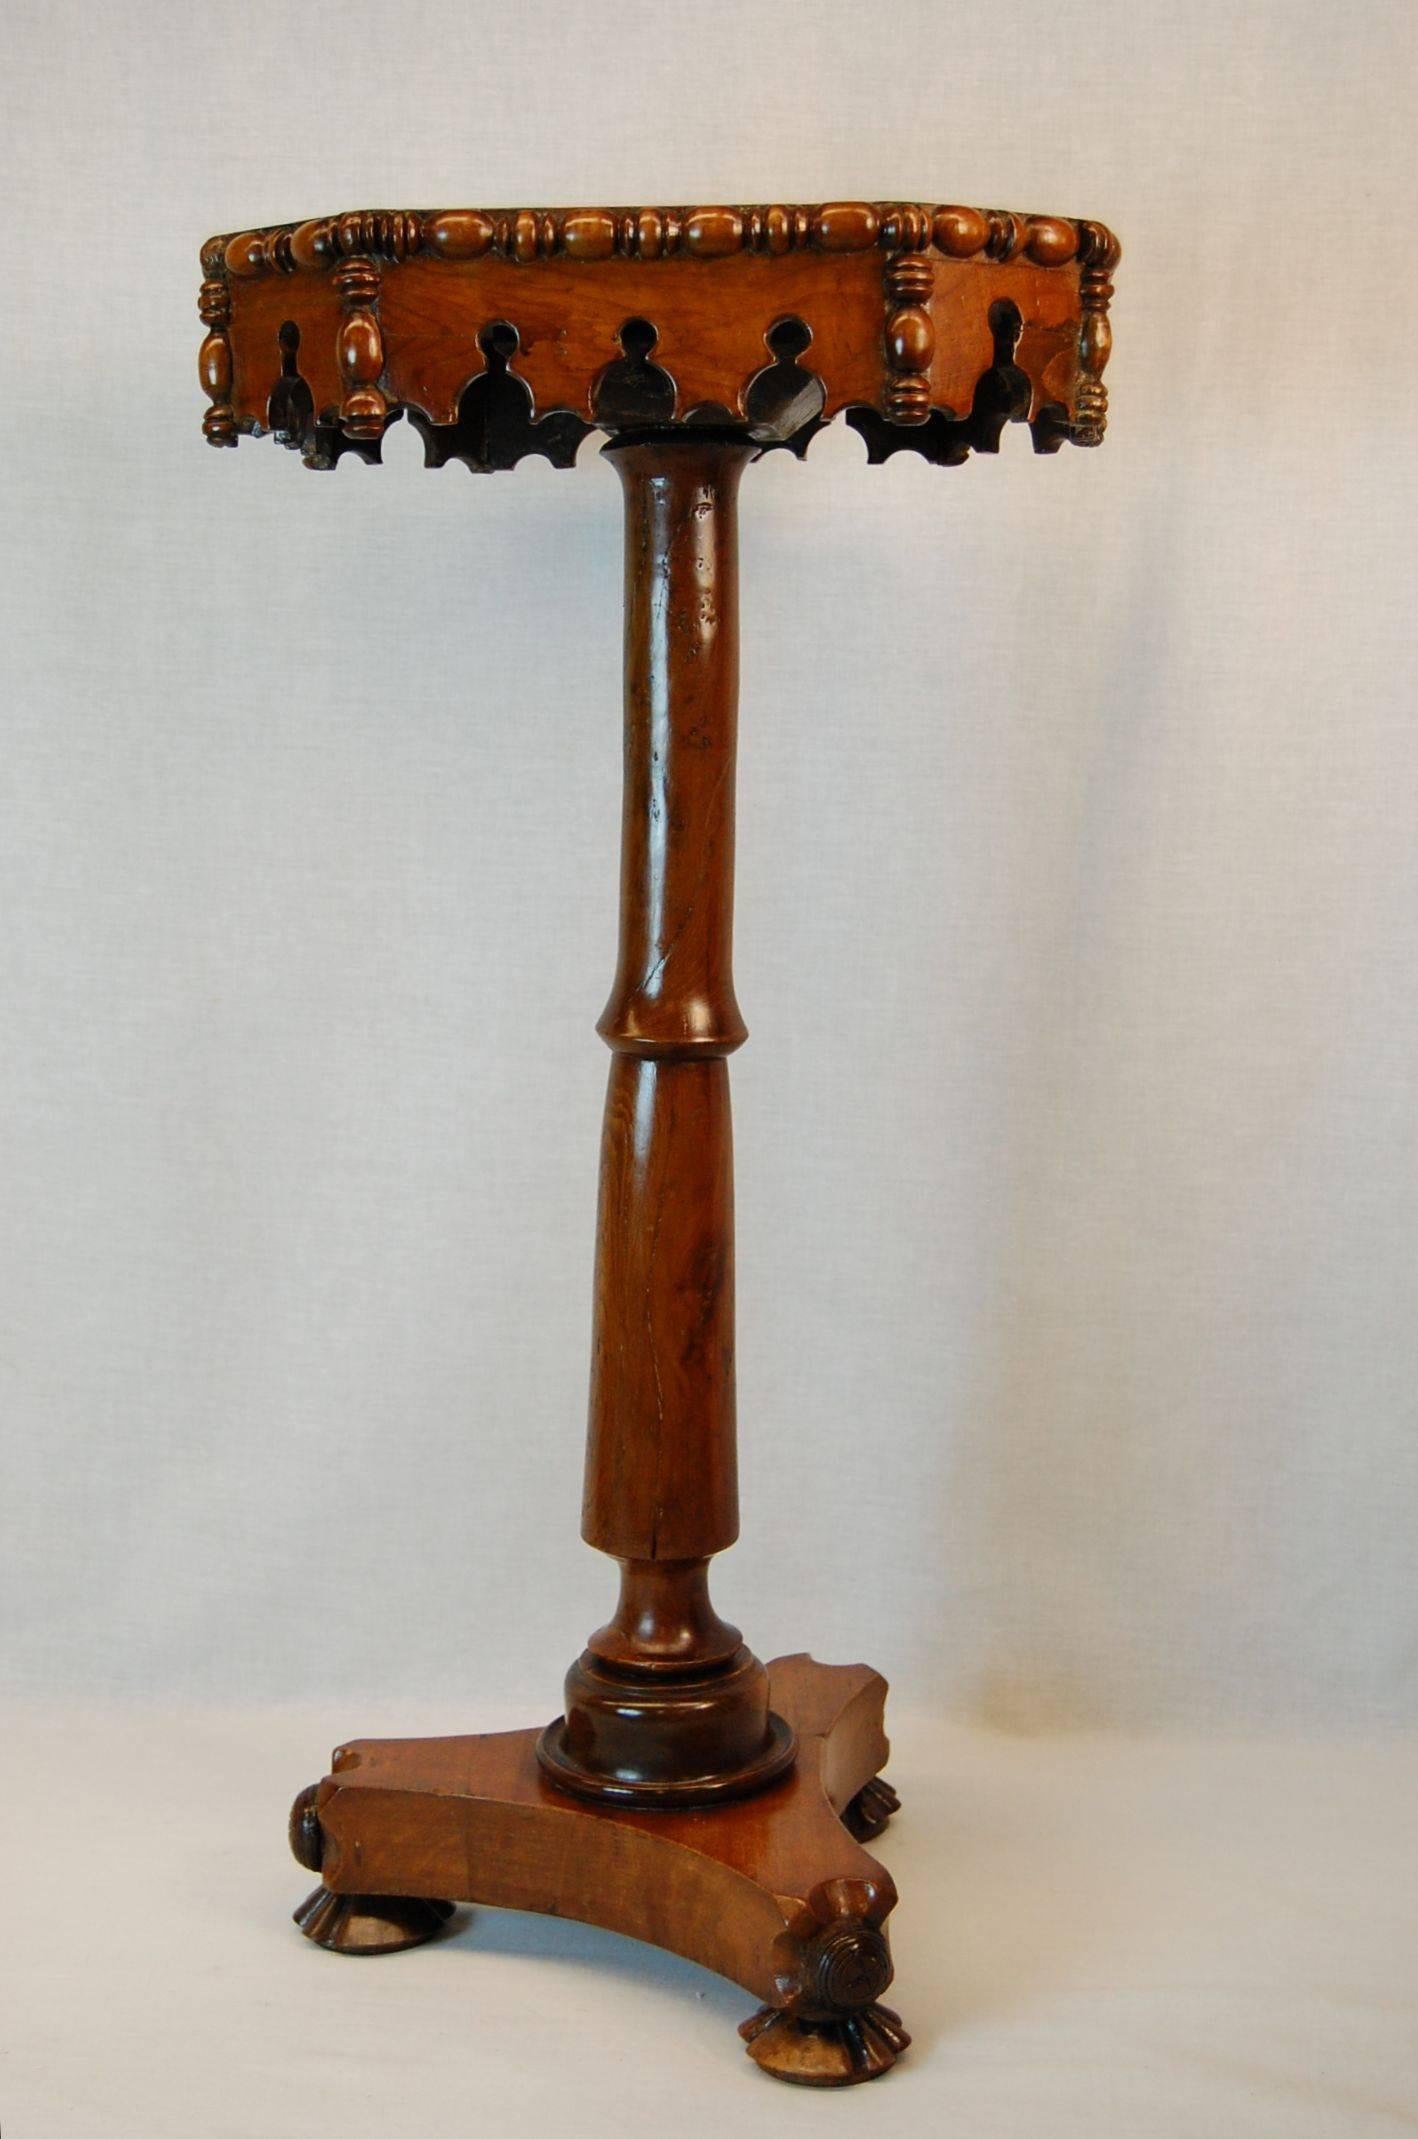 A William IV candle stand with octagonal top above a turned column, a Gothic themed apron with Egg and Turned wood designed molding surrounds the top and apron edges. The tripod base terminates in three circular carvings and rests upon circular